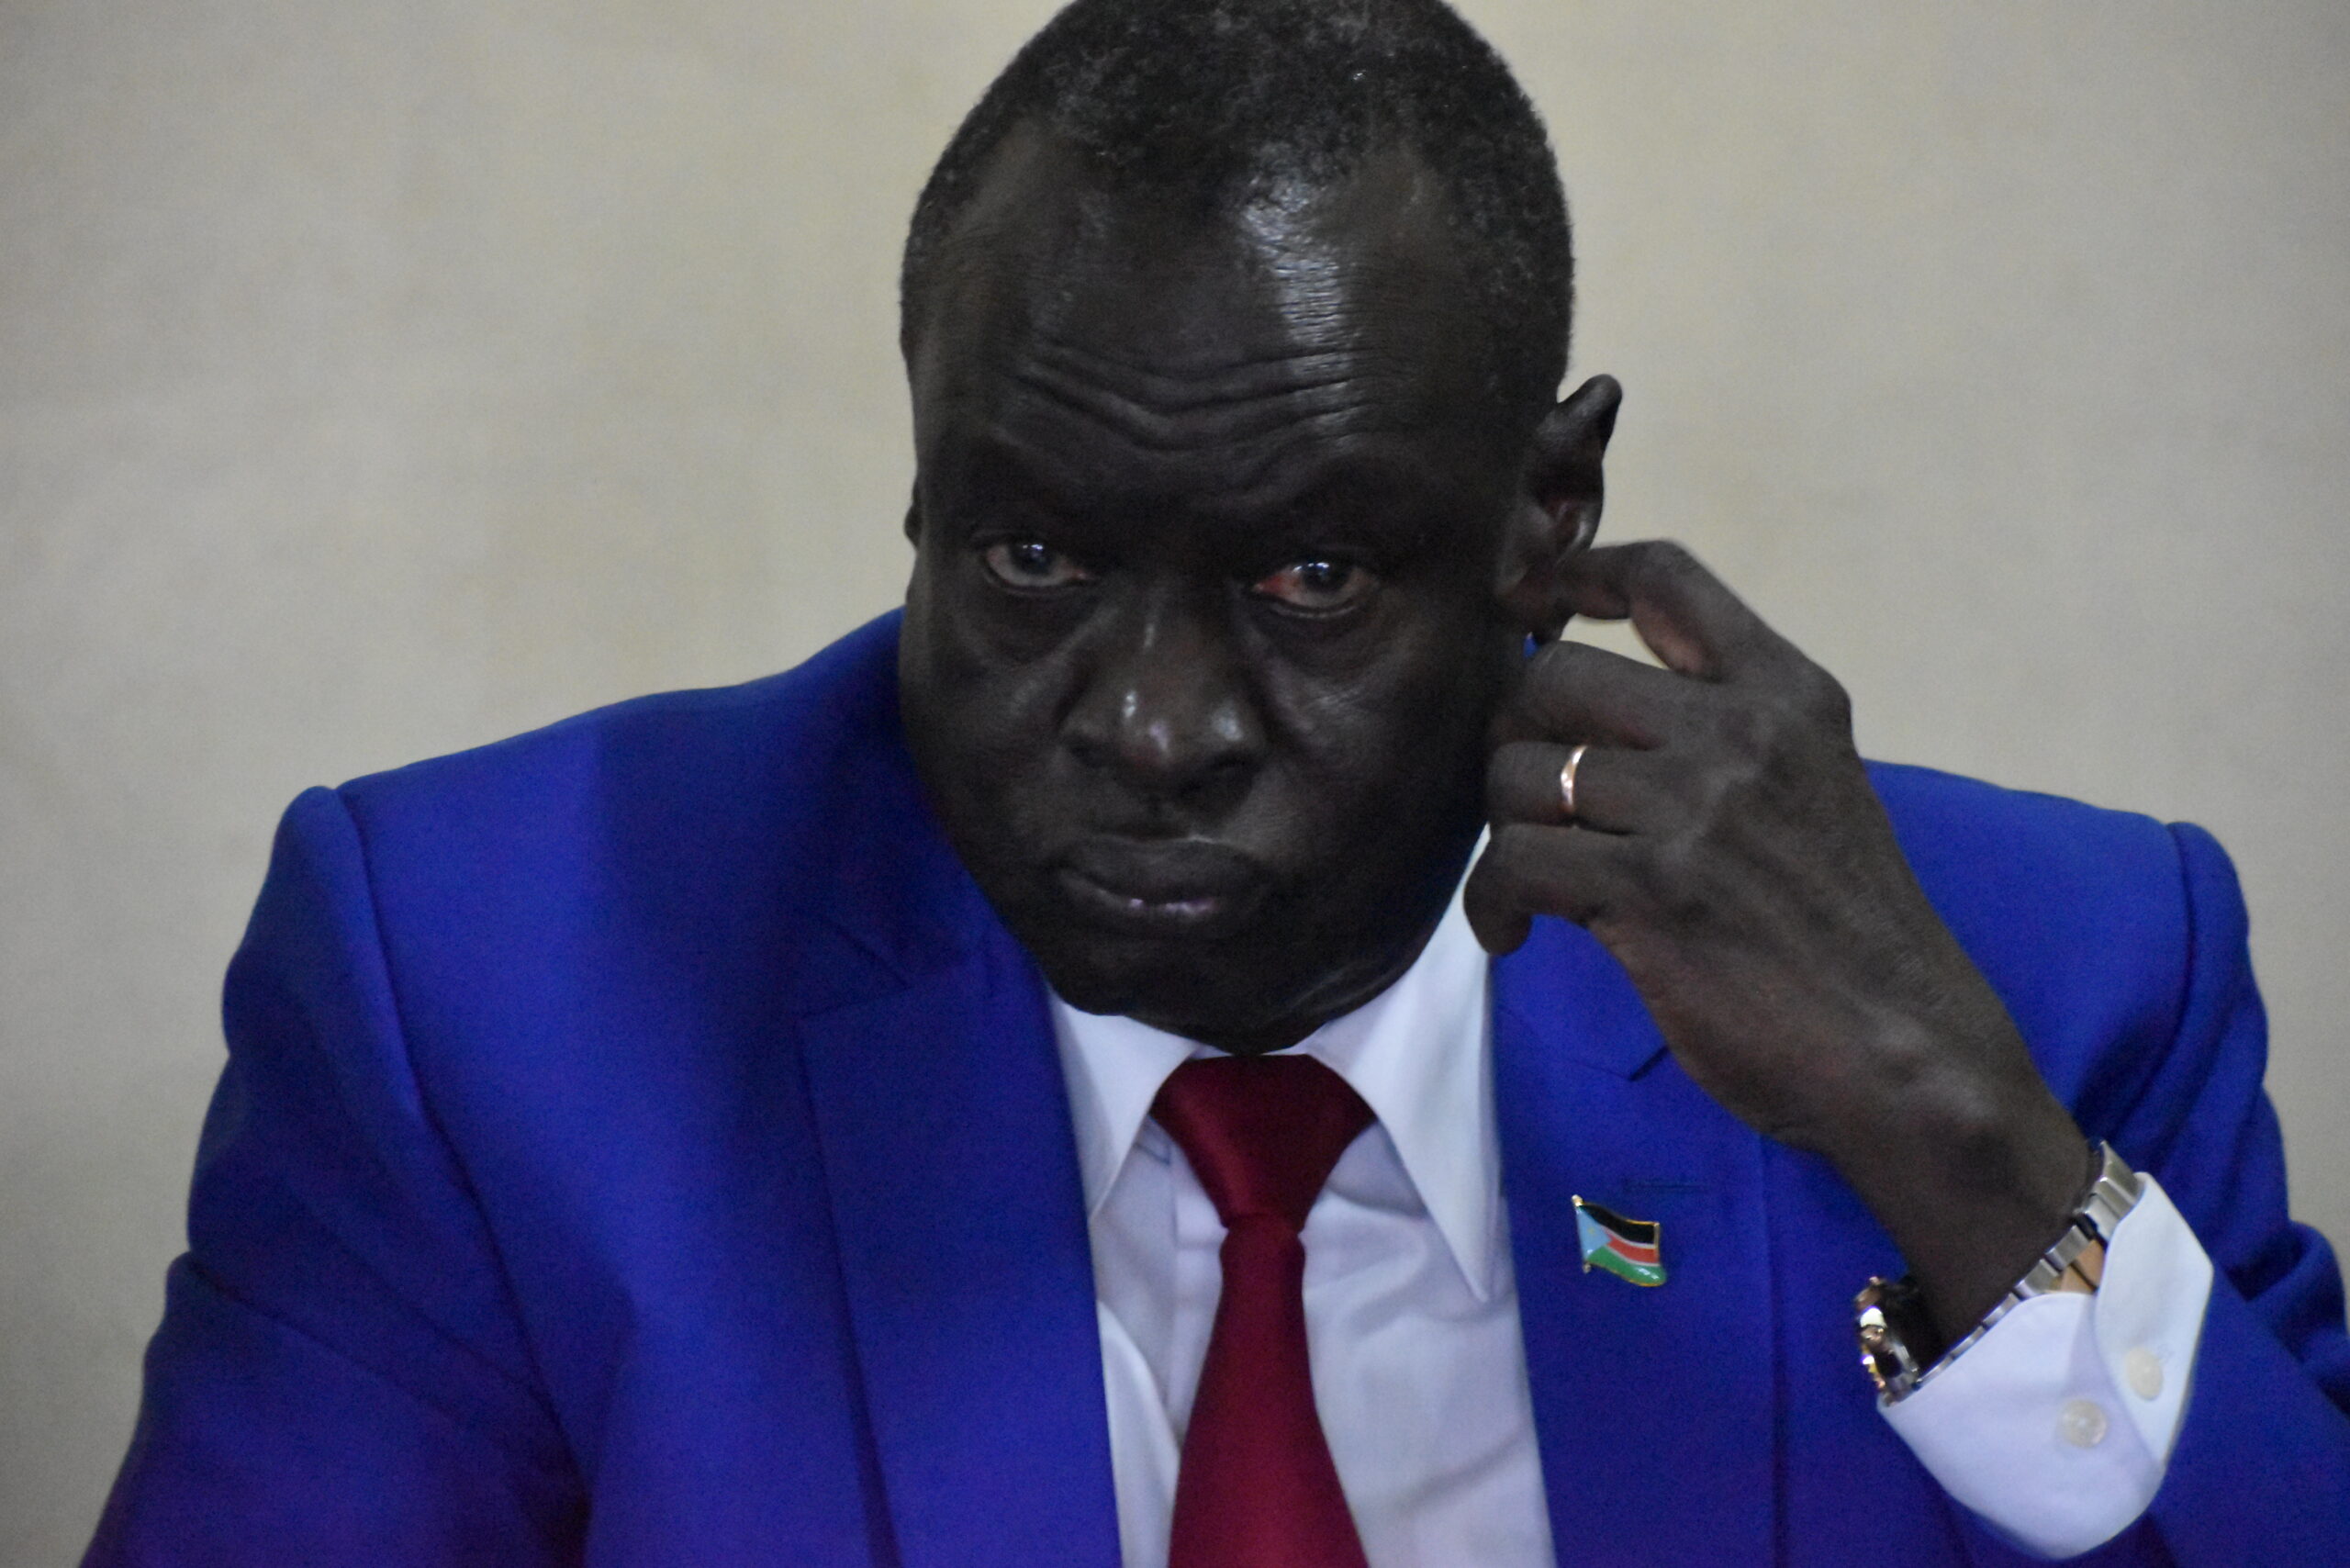 Salvatore Garang Mabiordit Wol is the 8th Finance Minister fired by President Kiir since 2011